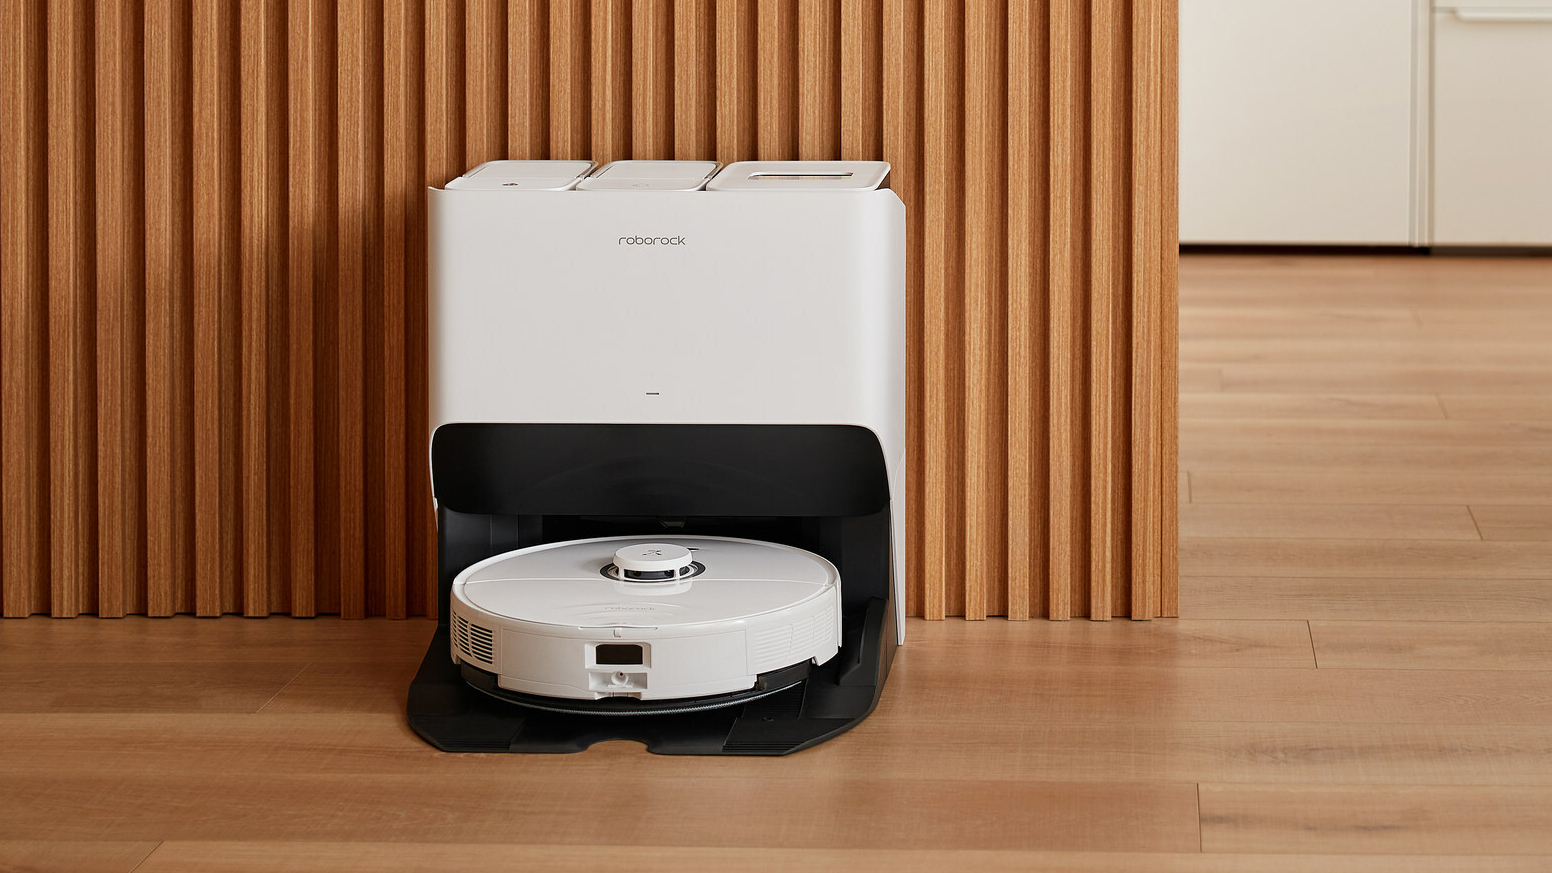 The Roborock S8 Pro robot vacuum in its dock in a kitchen